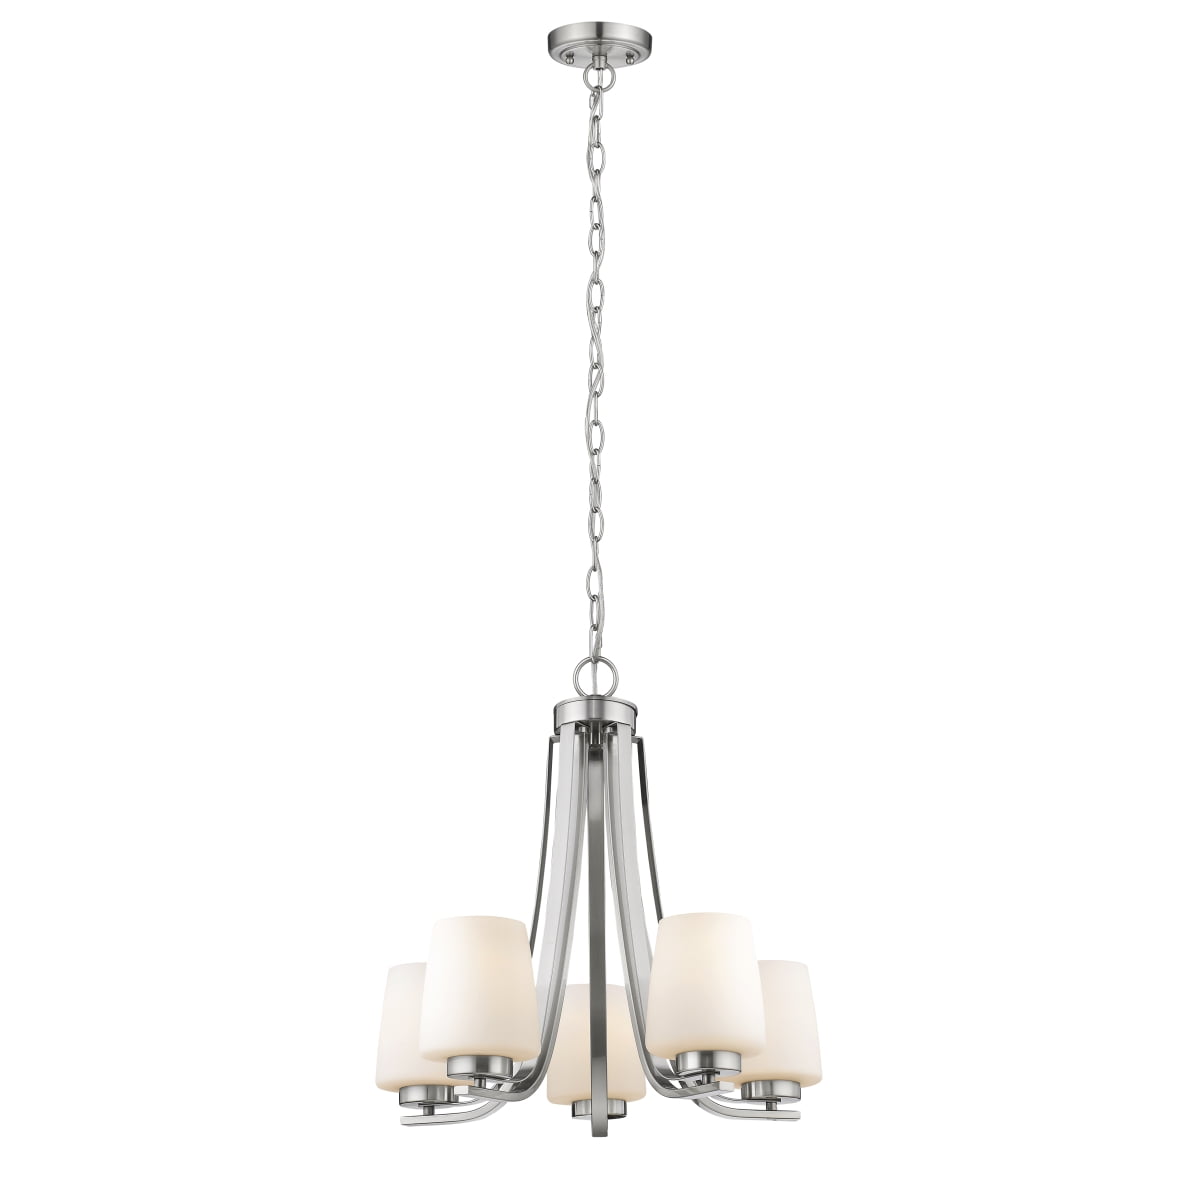 Ch2r003bn22-uc5 Olivia Contemporary 5 Light Brushed Nickel Mini Chandelier - 22 In.